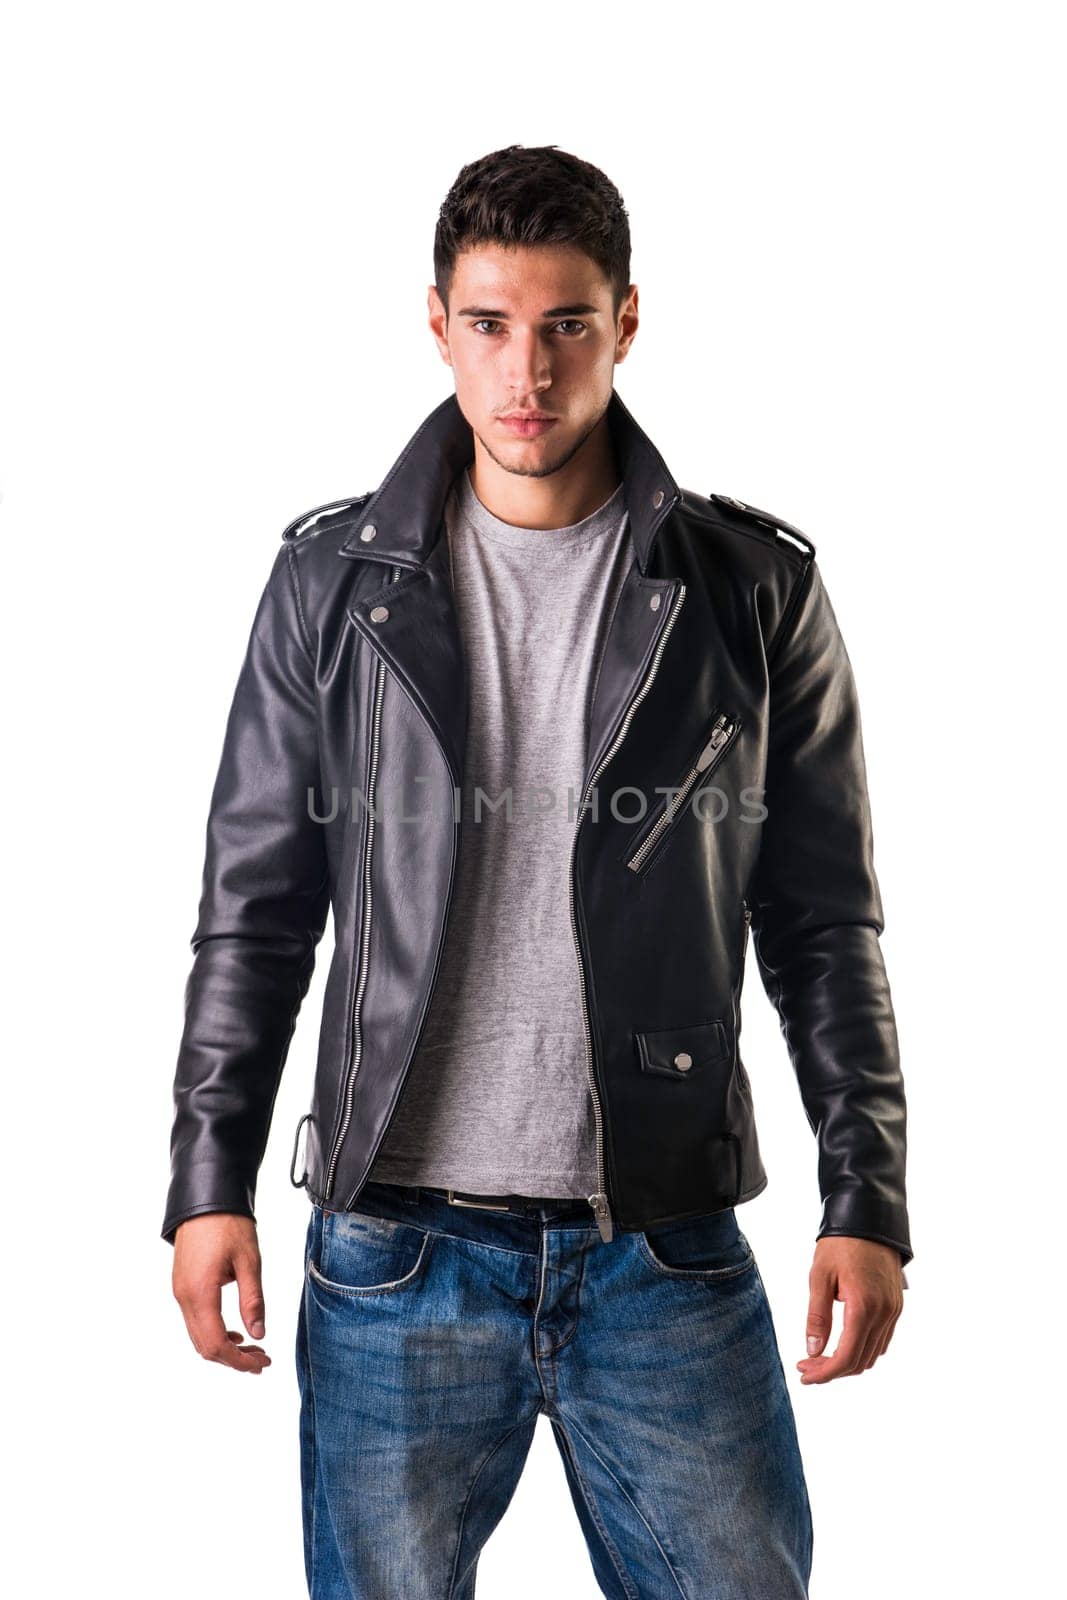 Young handsome man in studio shot, wearing black leather jacket by artofphoto